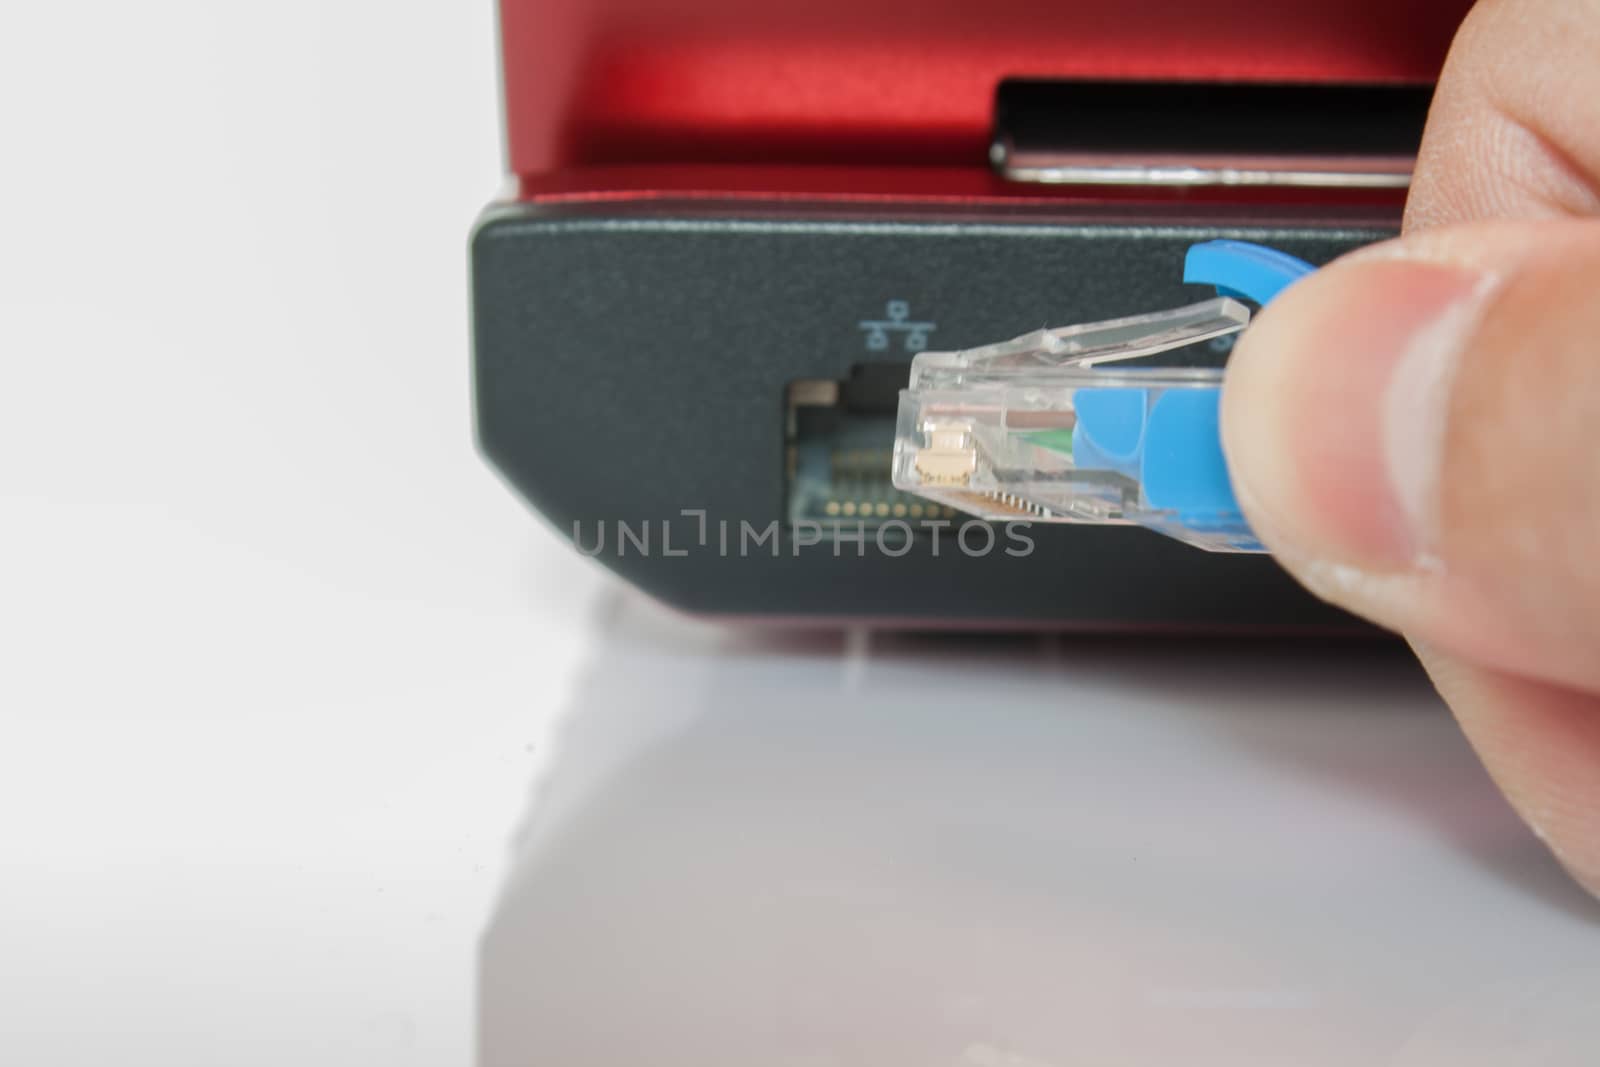 Connecting lan port to laptop computer isolated on white background